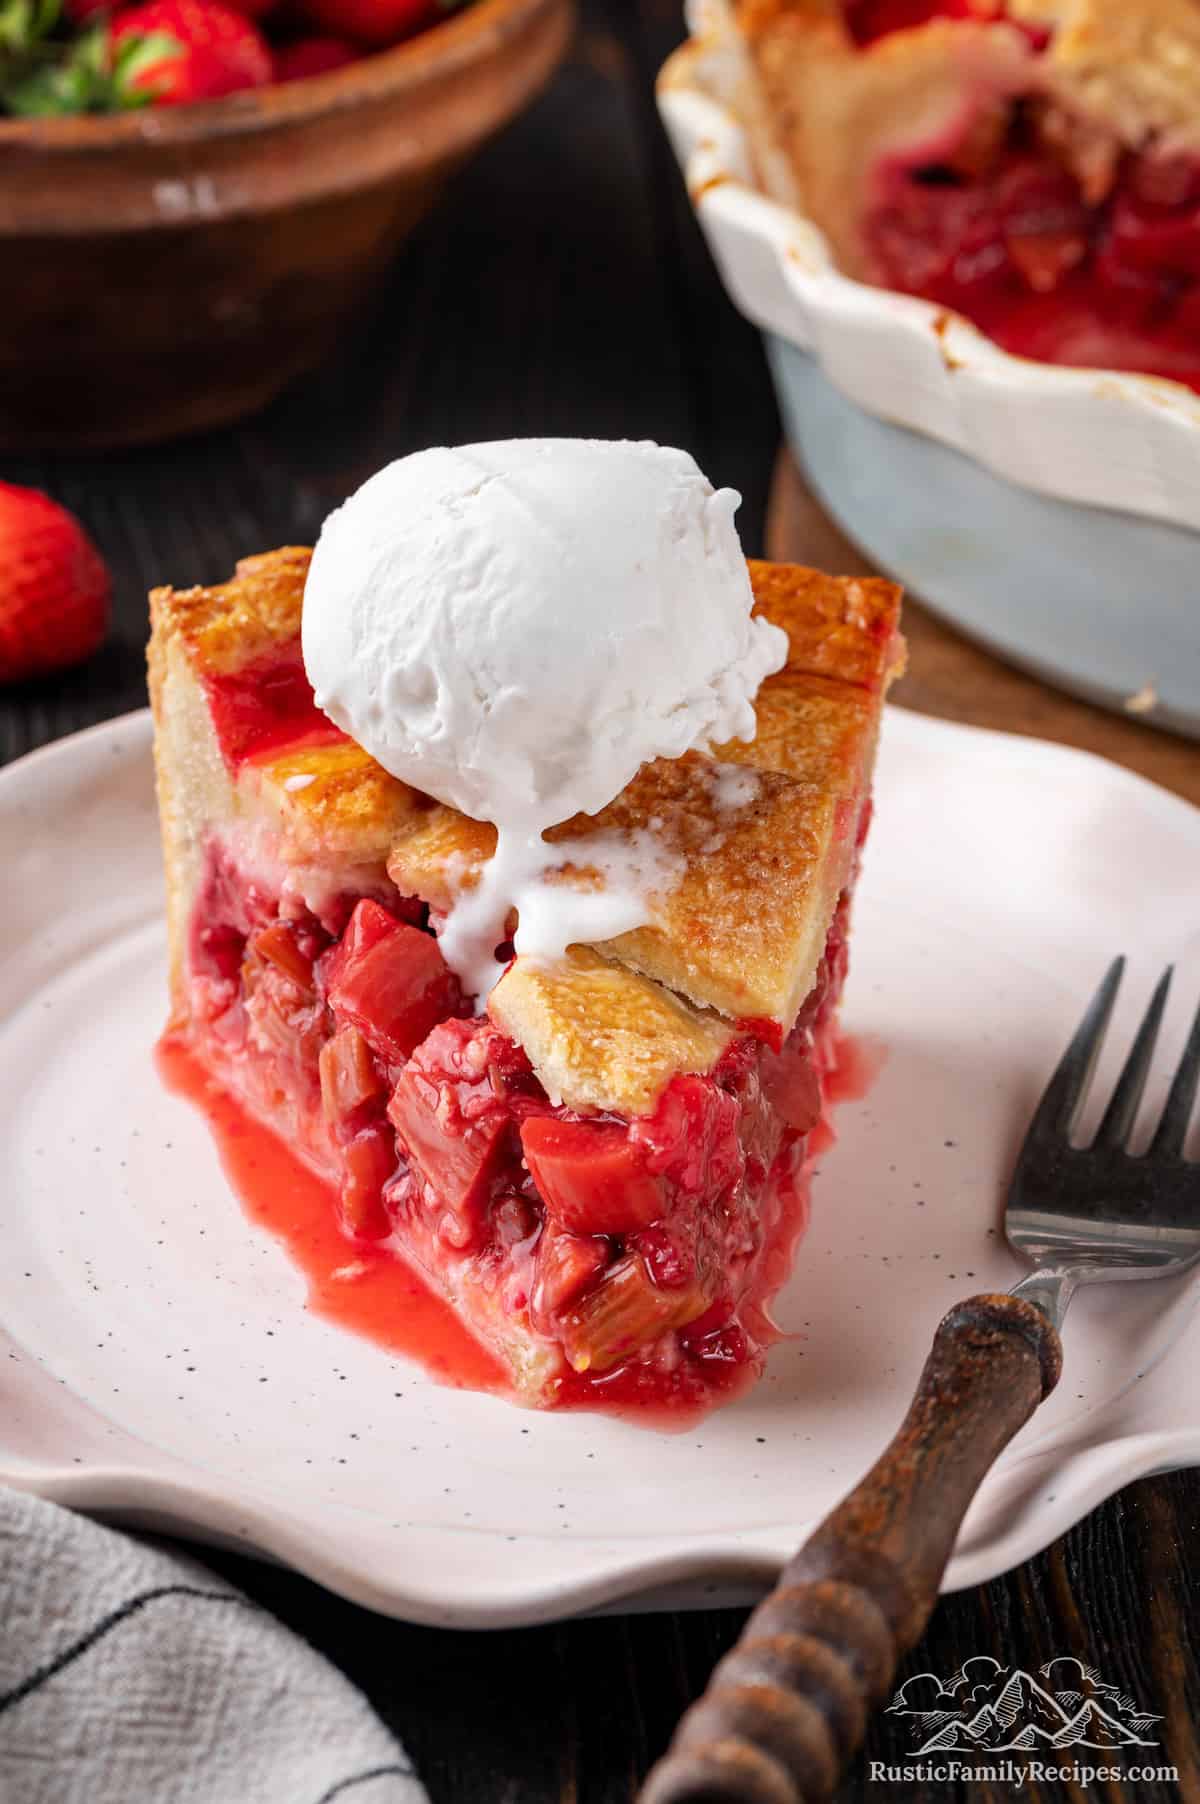 A slice of strawberry rhubarb pie facing forward on a white plate next to a fork, topped with whipped cream.